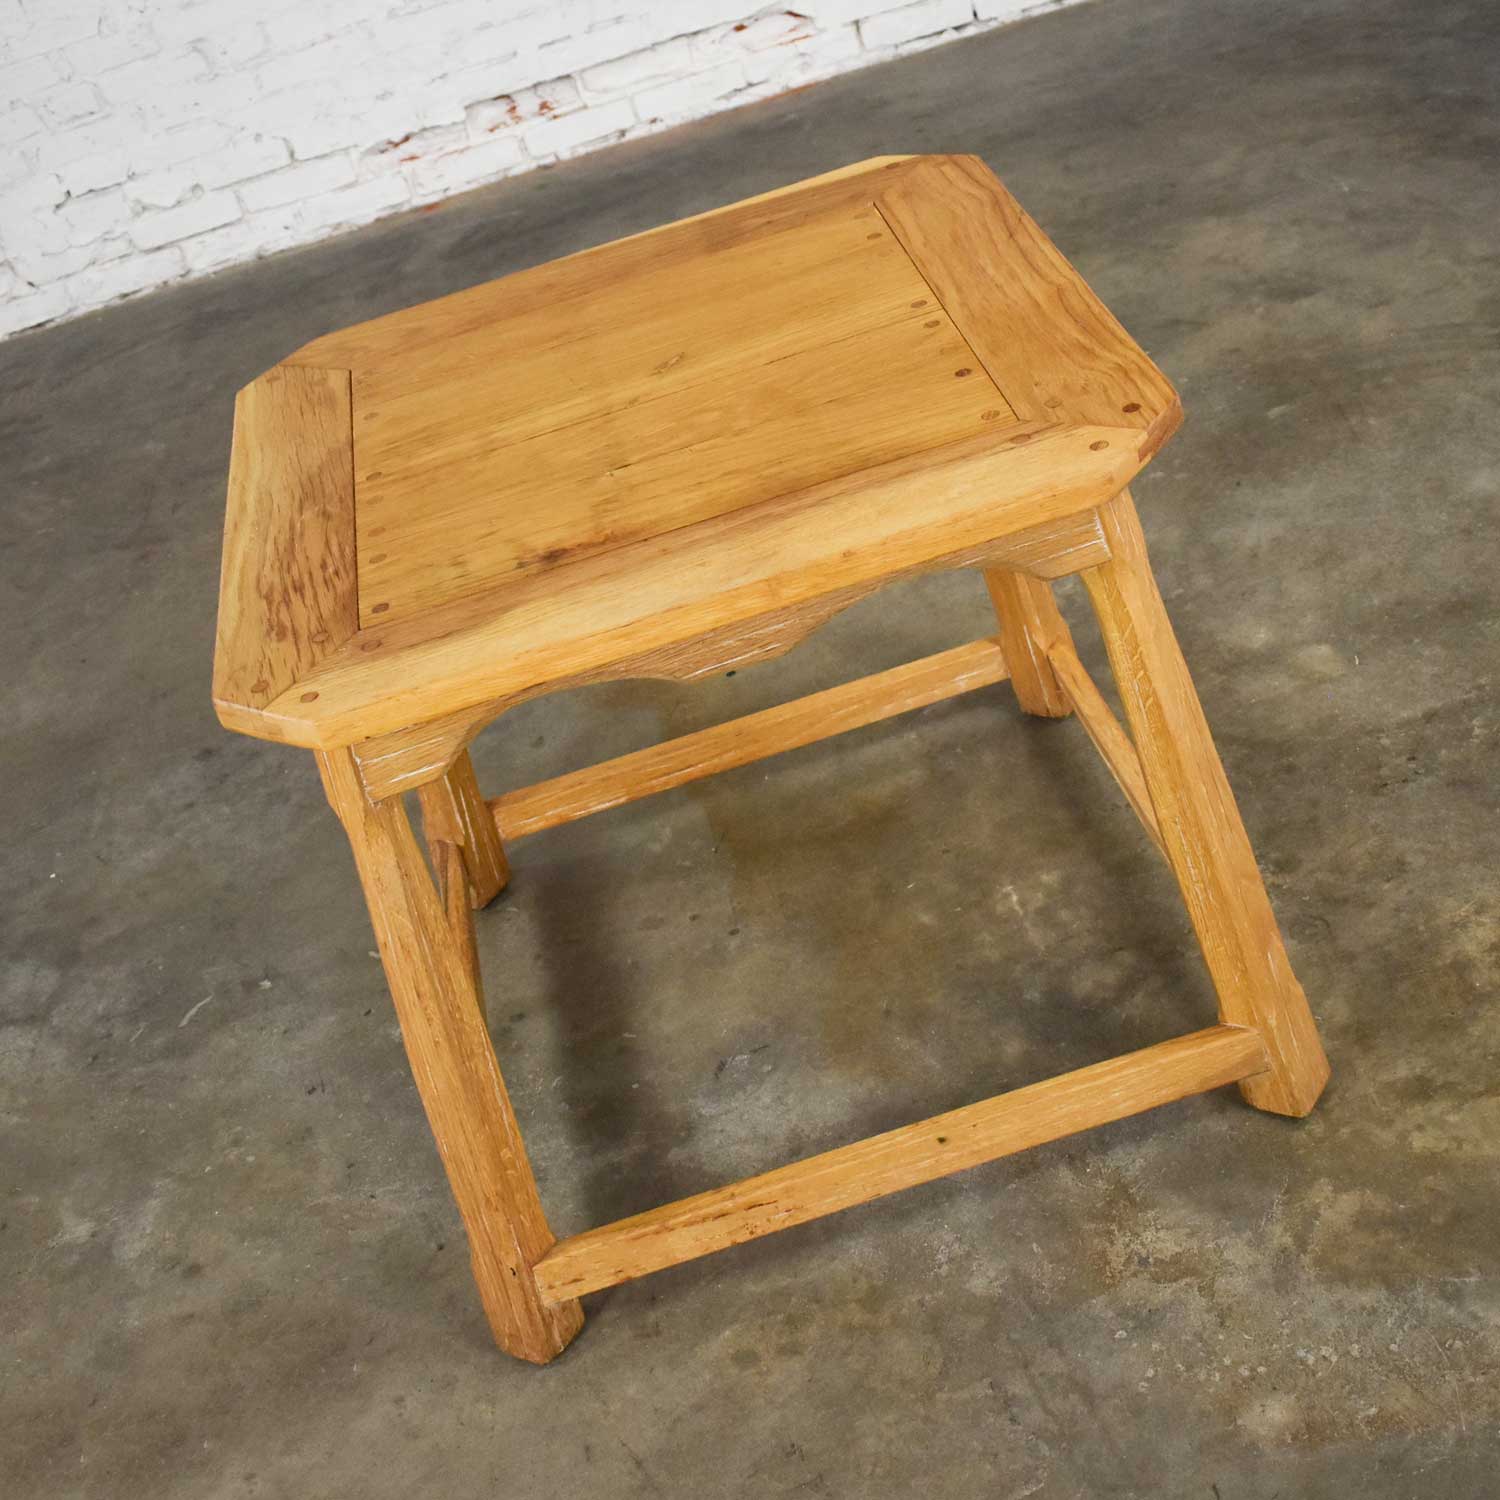 Larger Ranch Oak Lamp Table End Table with Natural Oak Finish by A. Brandt Company